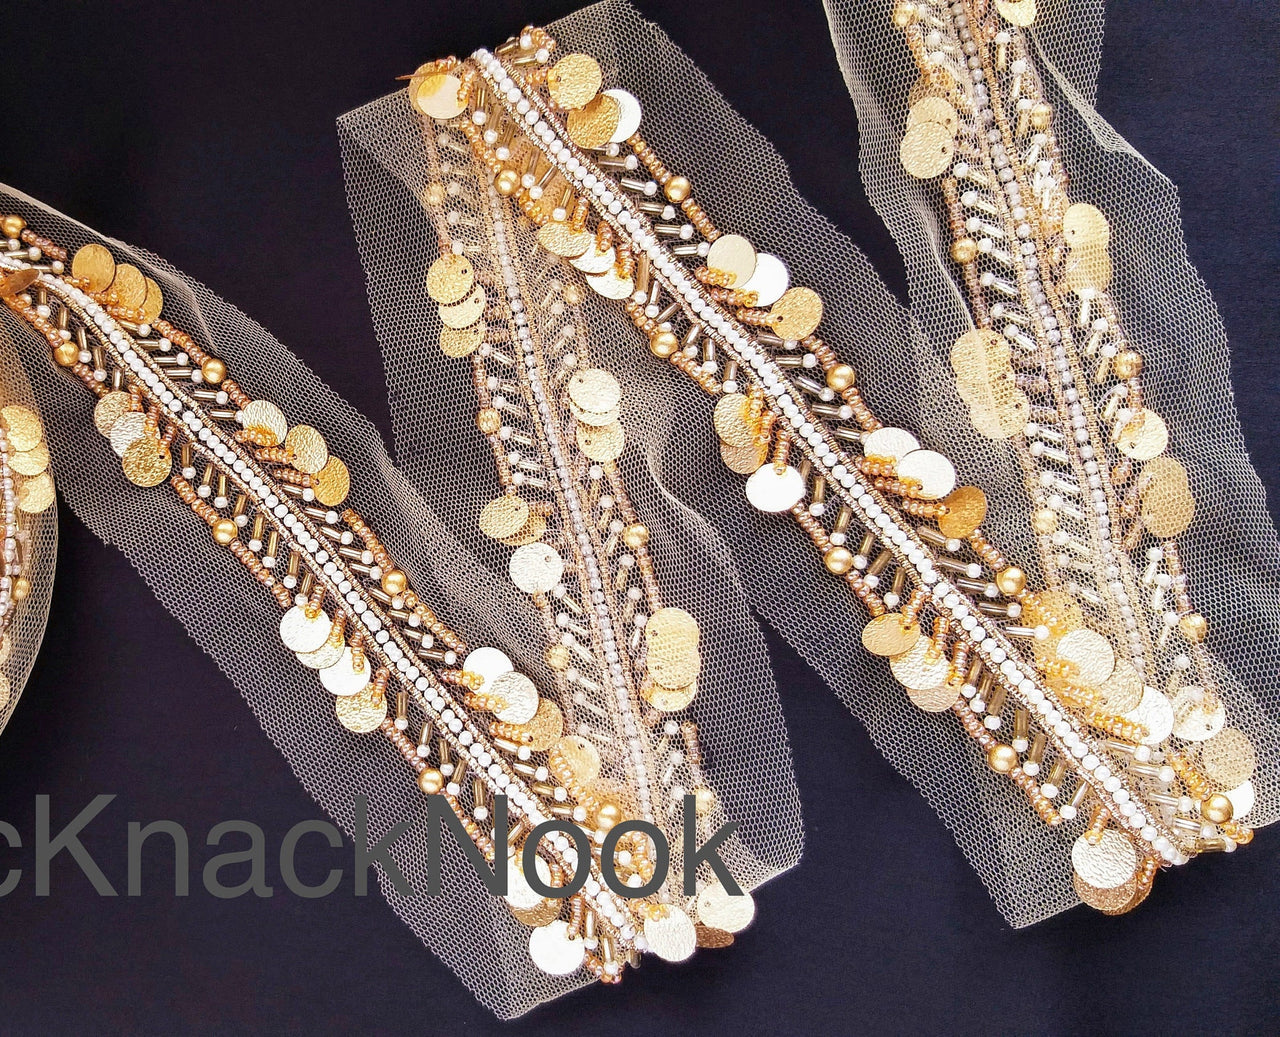 Beige Net Fabric Trim With Gold, White And Silver Beads, Gold Sequins Embellishments